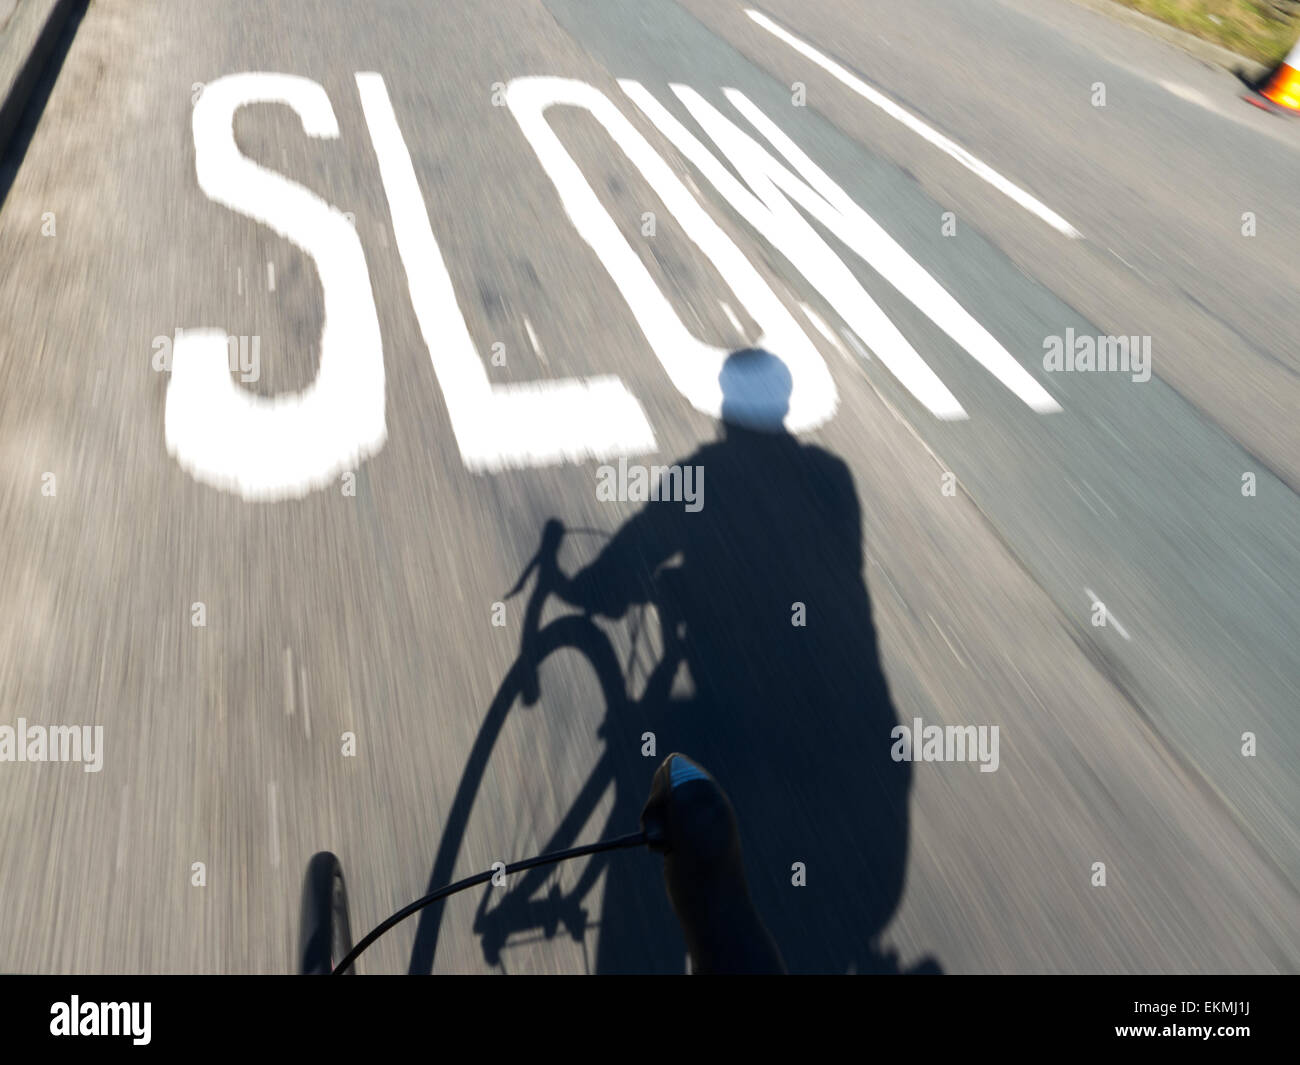 Cyclisme vers SLOW sign painted on road Banque D'Images